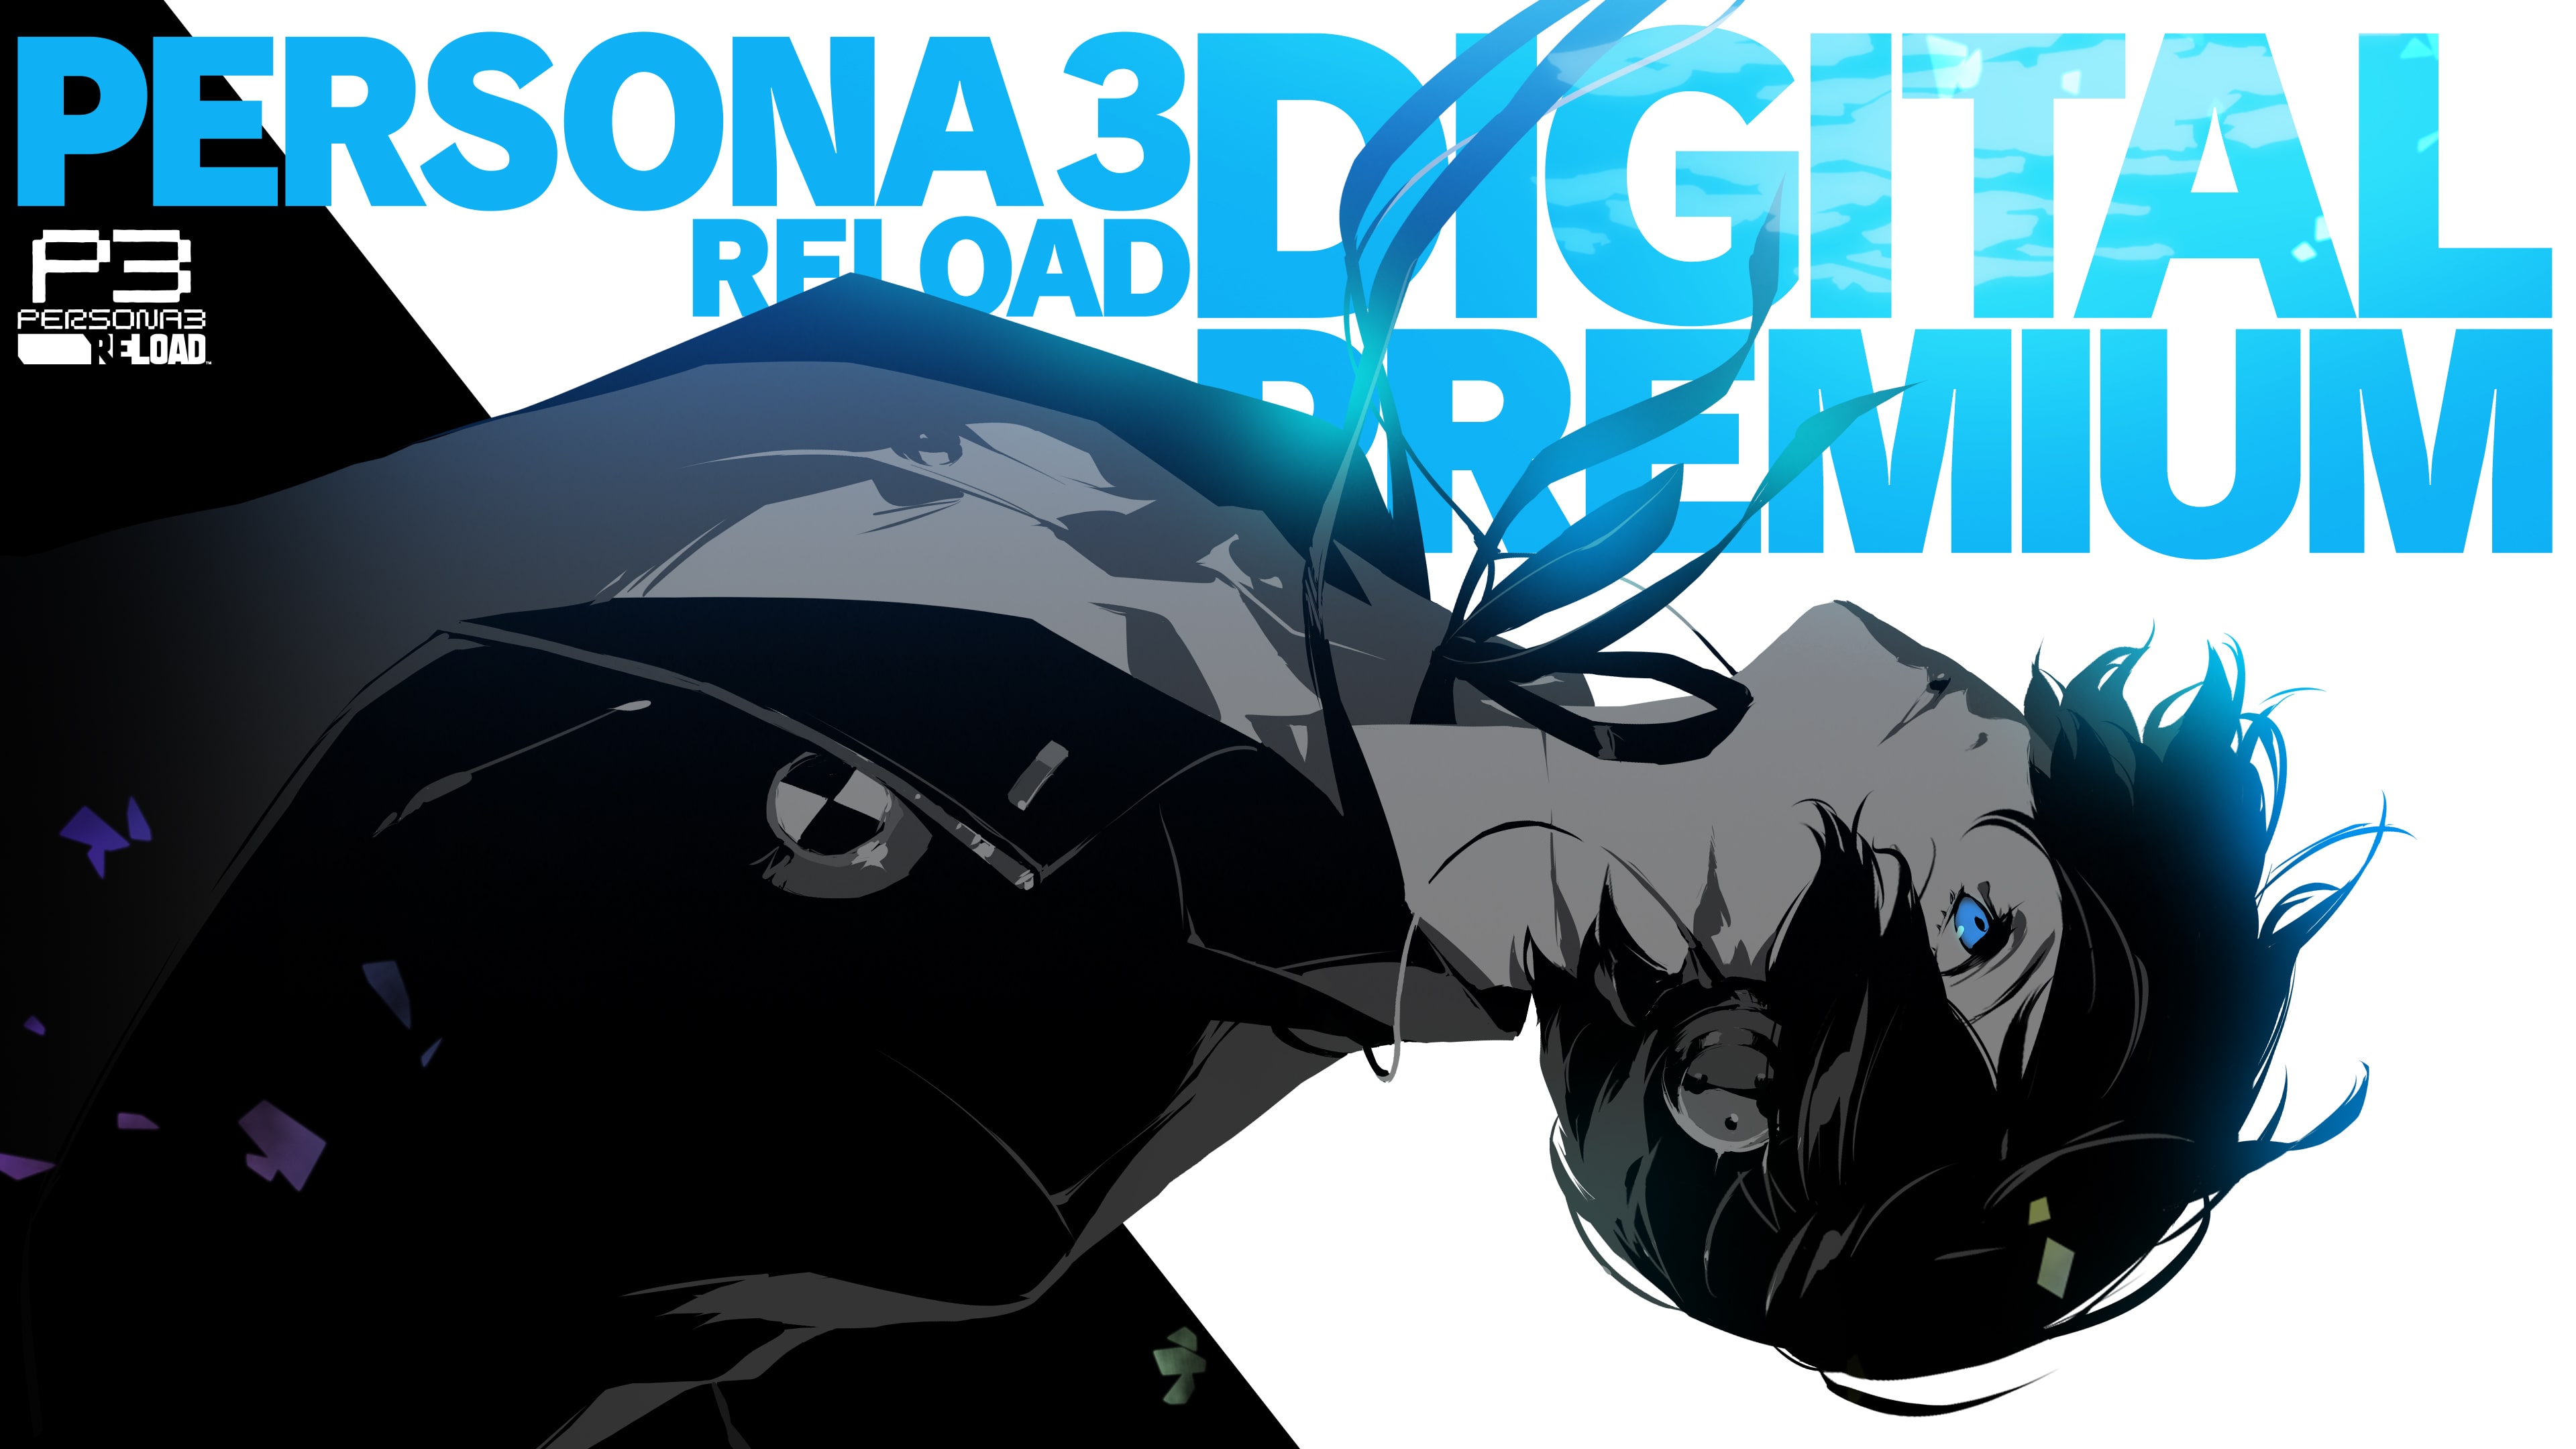 Persona 3 Reload Digital Premium Edition PS4 & PS5 (Chinese/Korean Ver.) (Simplified Chinese, Korean, Traditional Chinese)